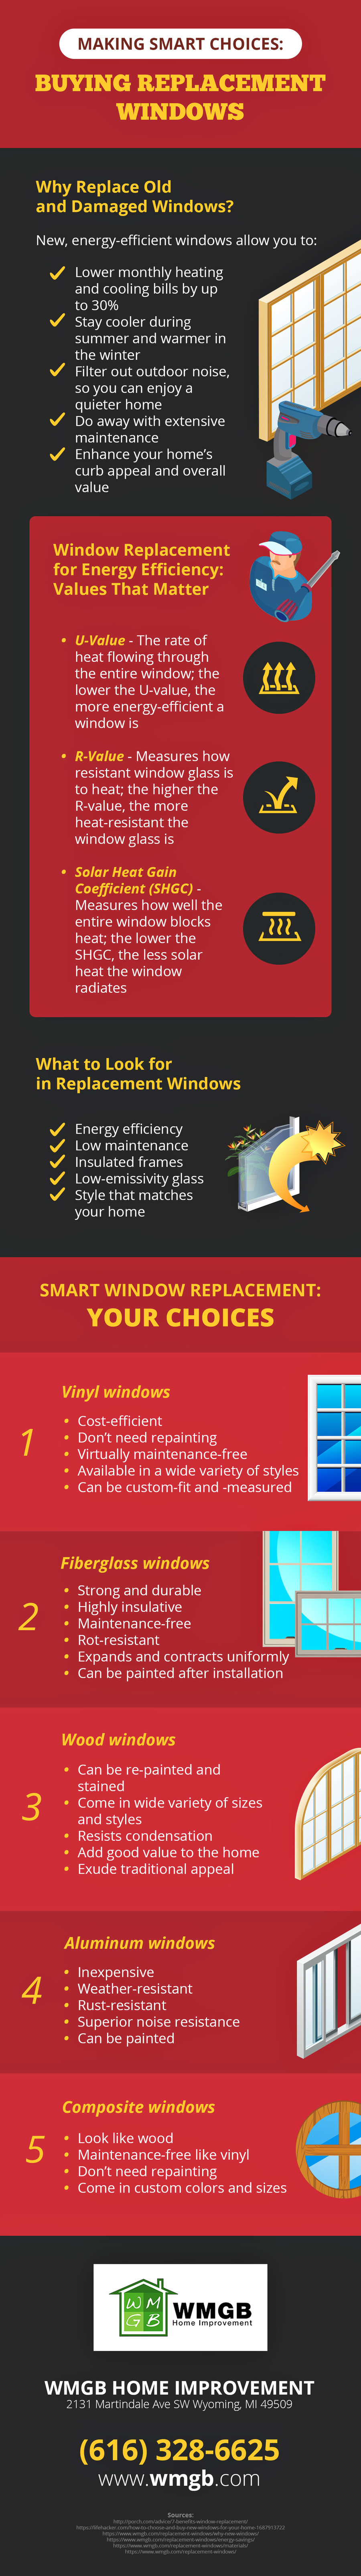 Buying Replacement Windows